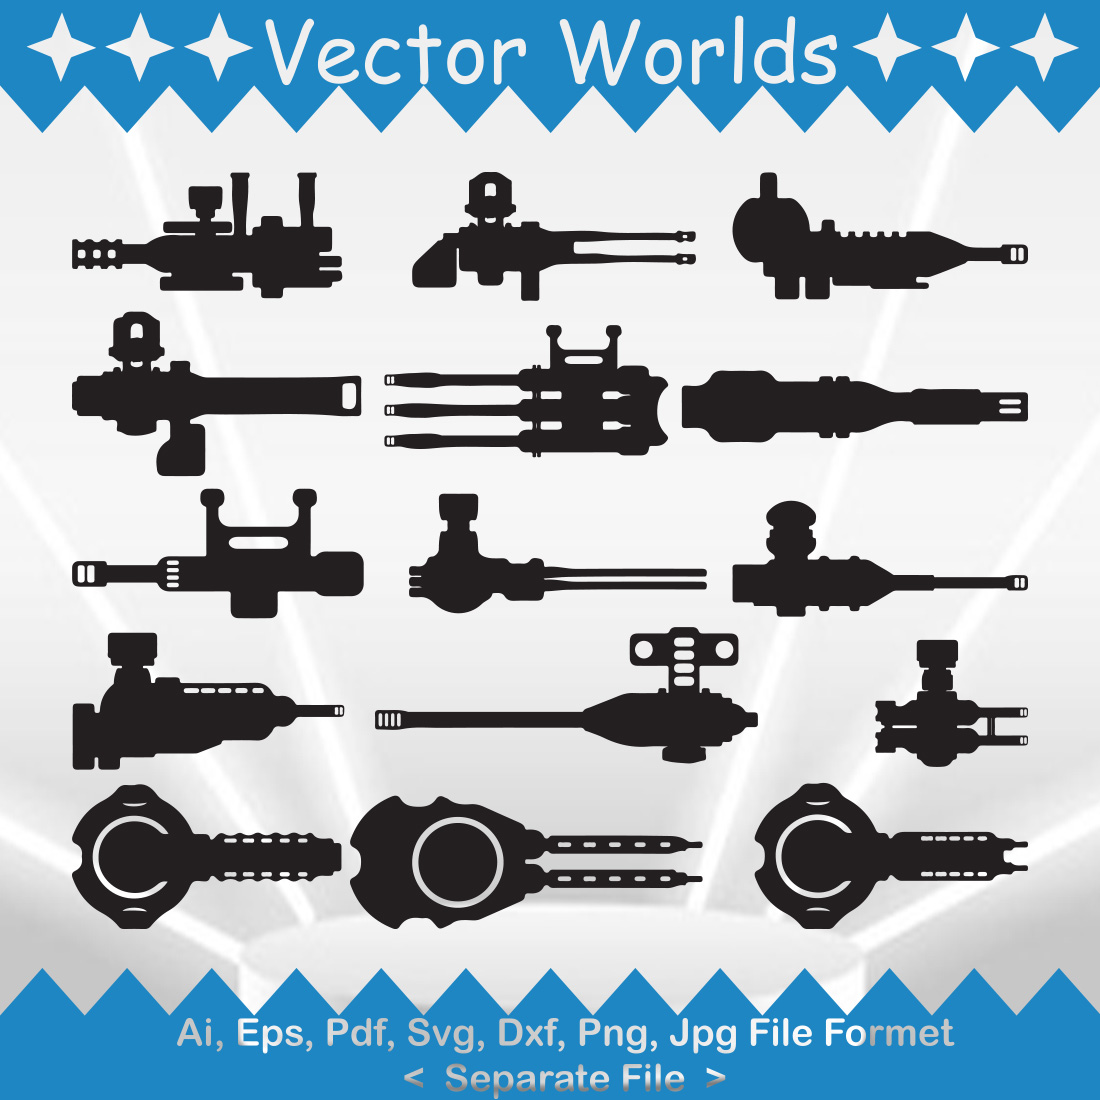 Spaceship Weapons SVG Vector Design cover image.